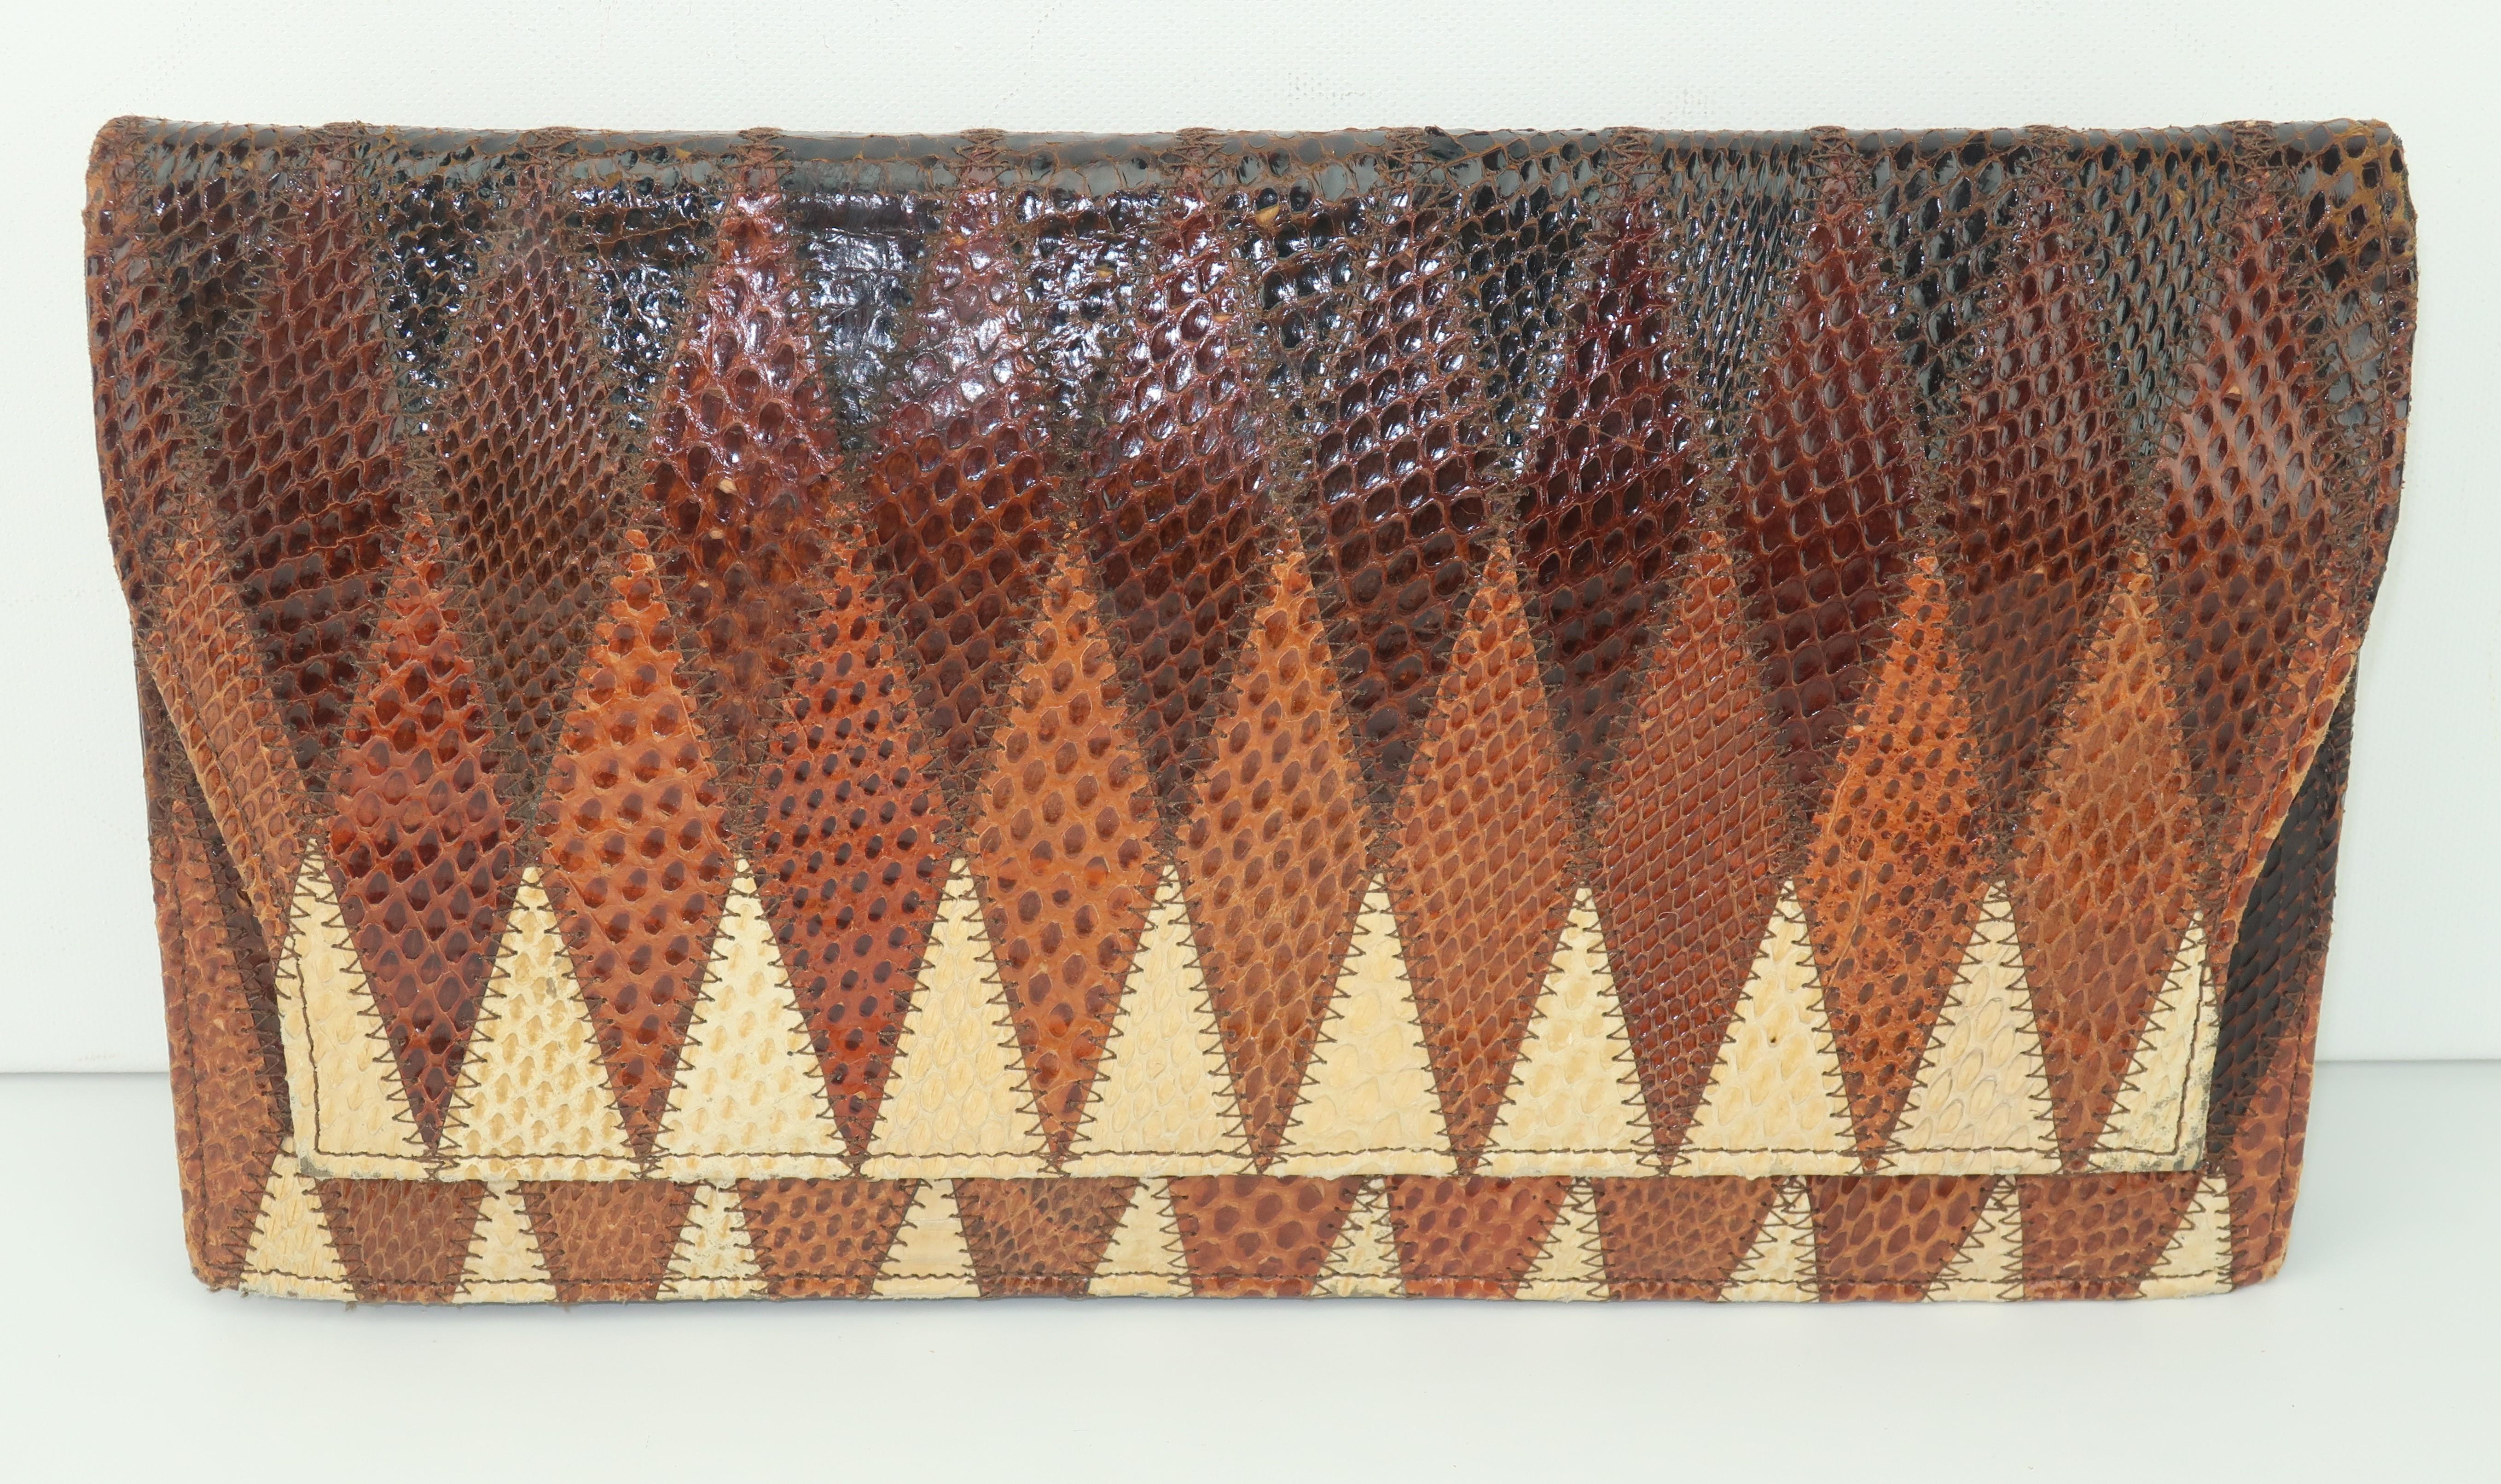 Patchwork perfection!  A 1970's Kaufmann of London patchwork snakeskin clutch handbag with a zigzag effect in shades of dark brown, chocolate and beige.  The envelope silhouette snaps open to reveal a faille fabric interior with an open pocket and